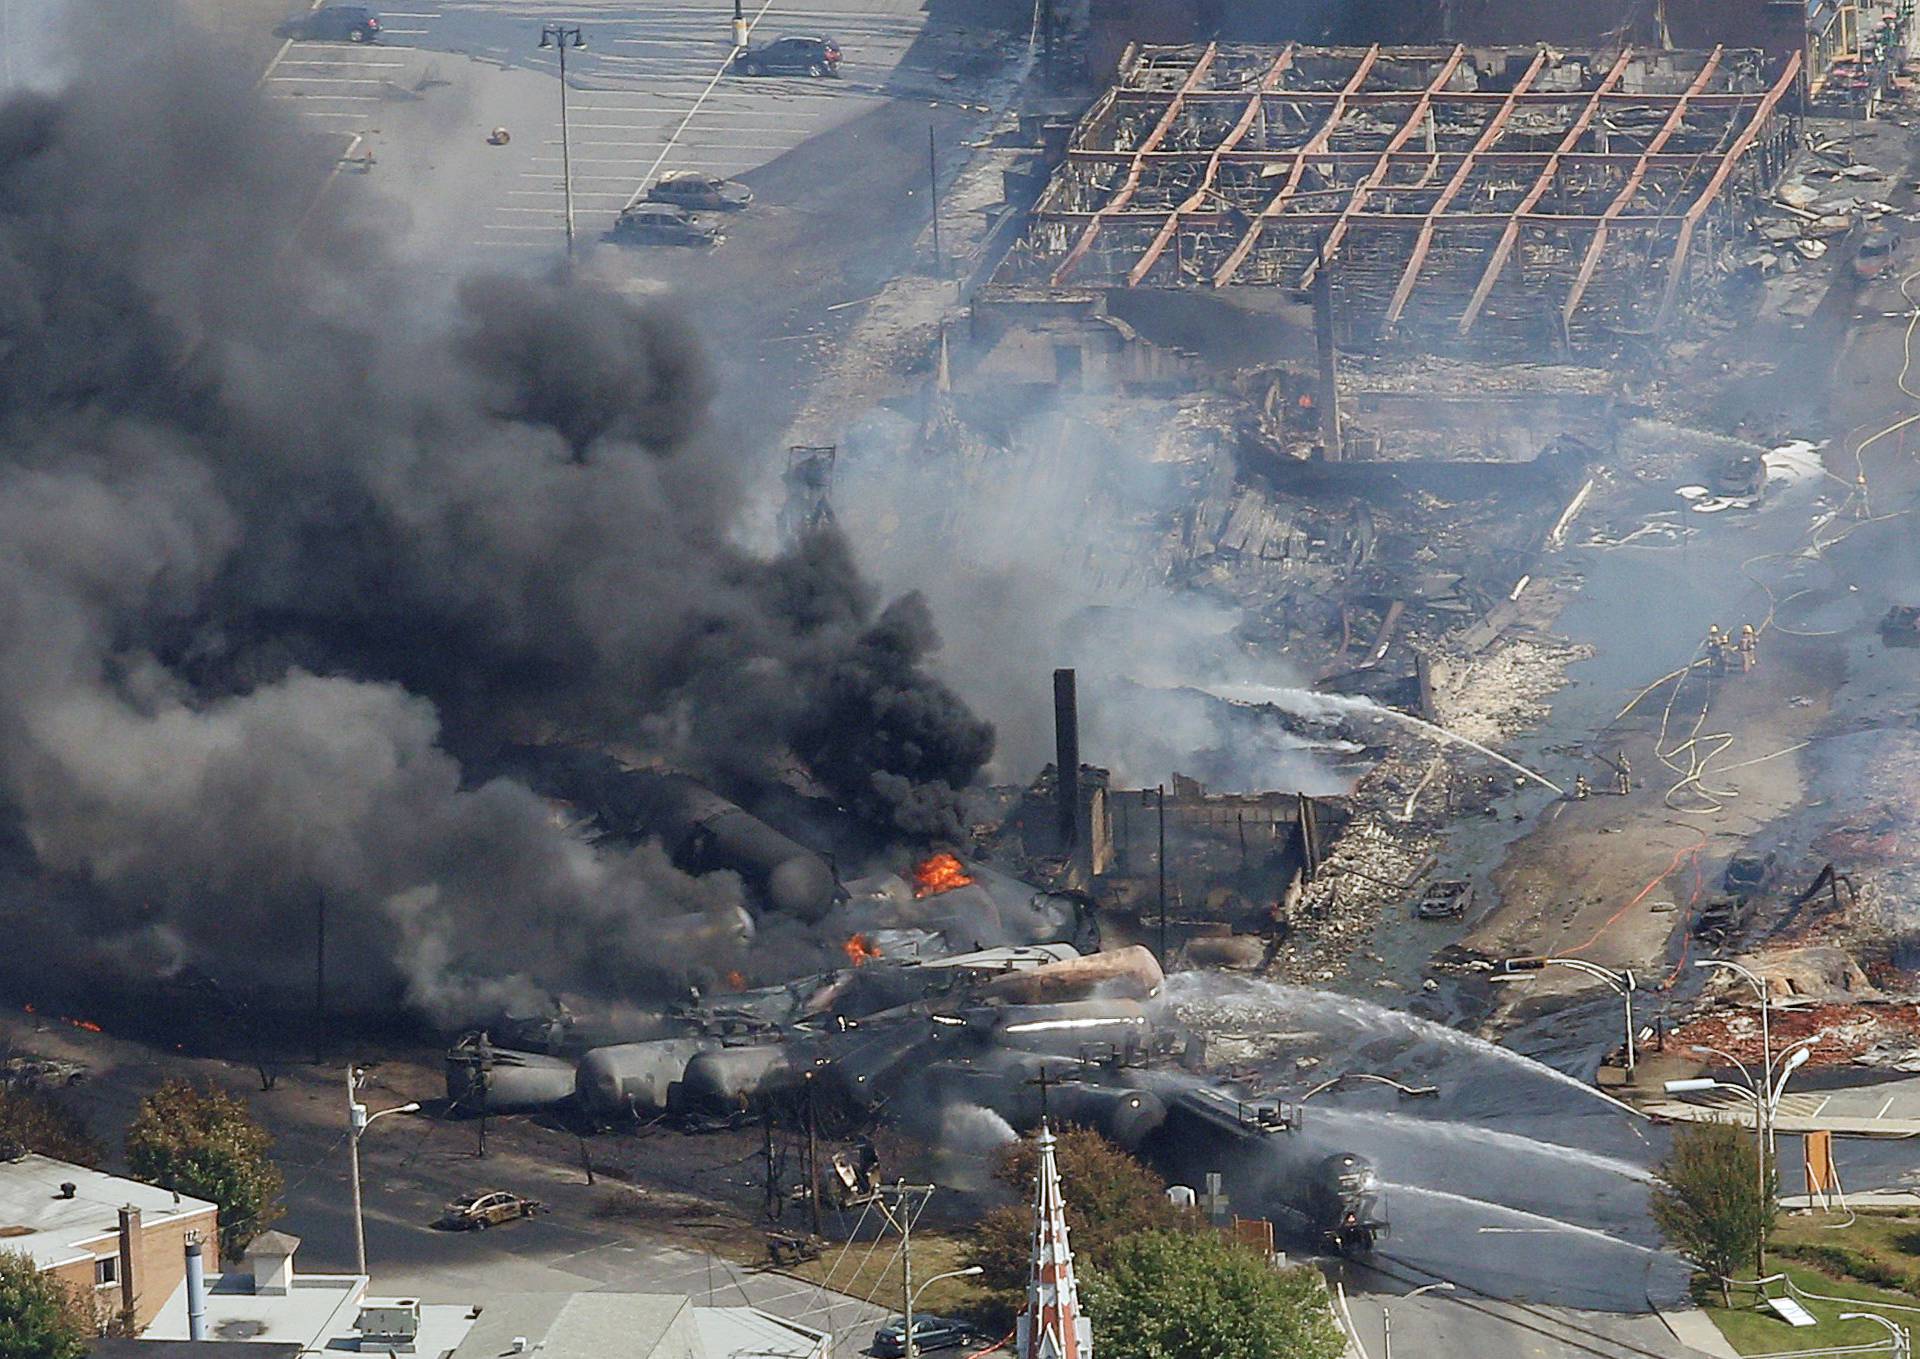 FILE PHOTO: First responders work on the site of a train wreck in Lac Megantic